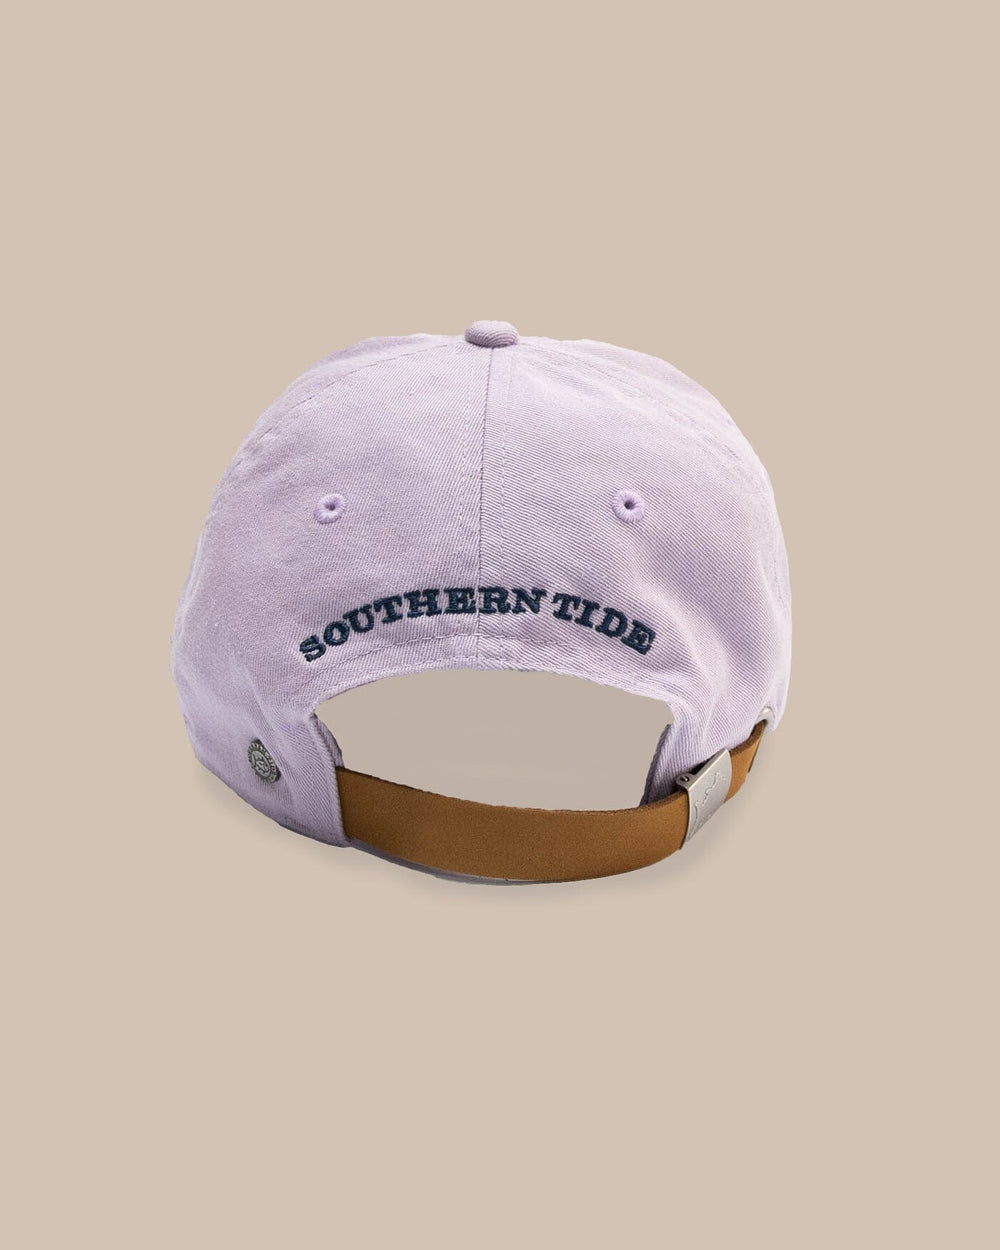 The detail view of the Southern Tide Mini Skipjack Leather Strap Hat by Southern Tide - Orchid Petal